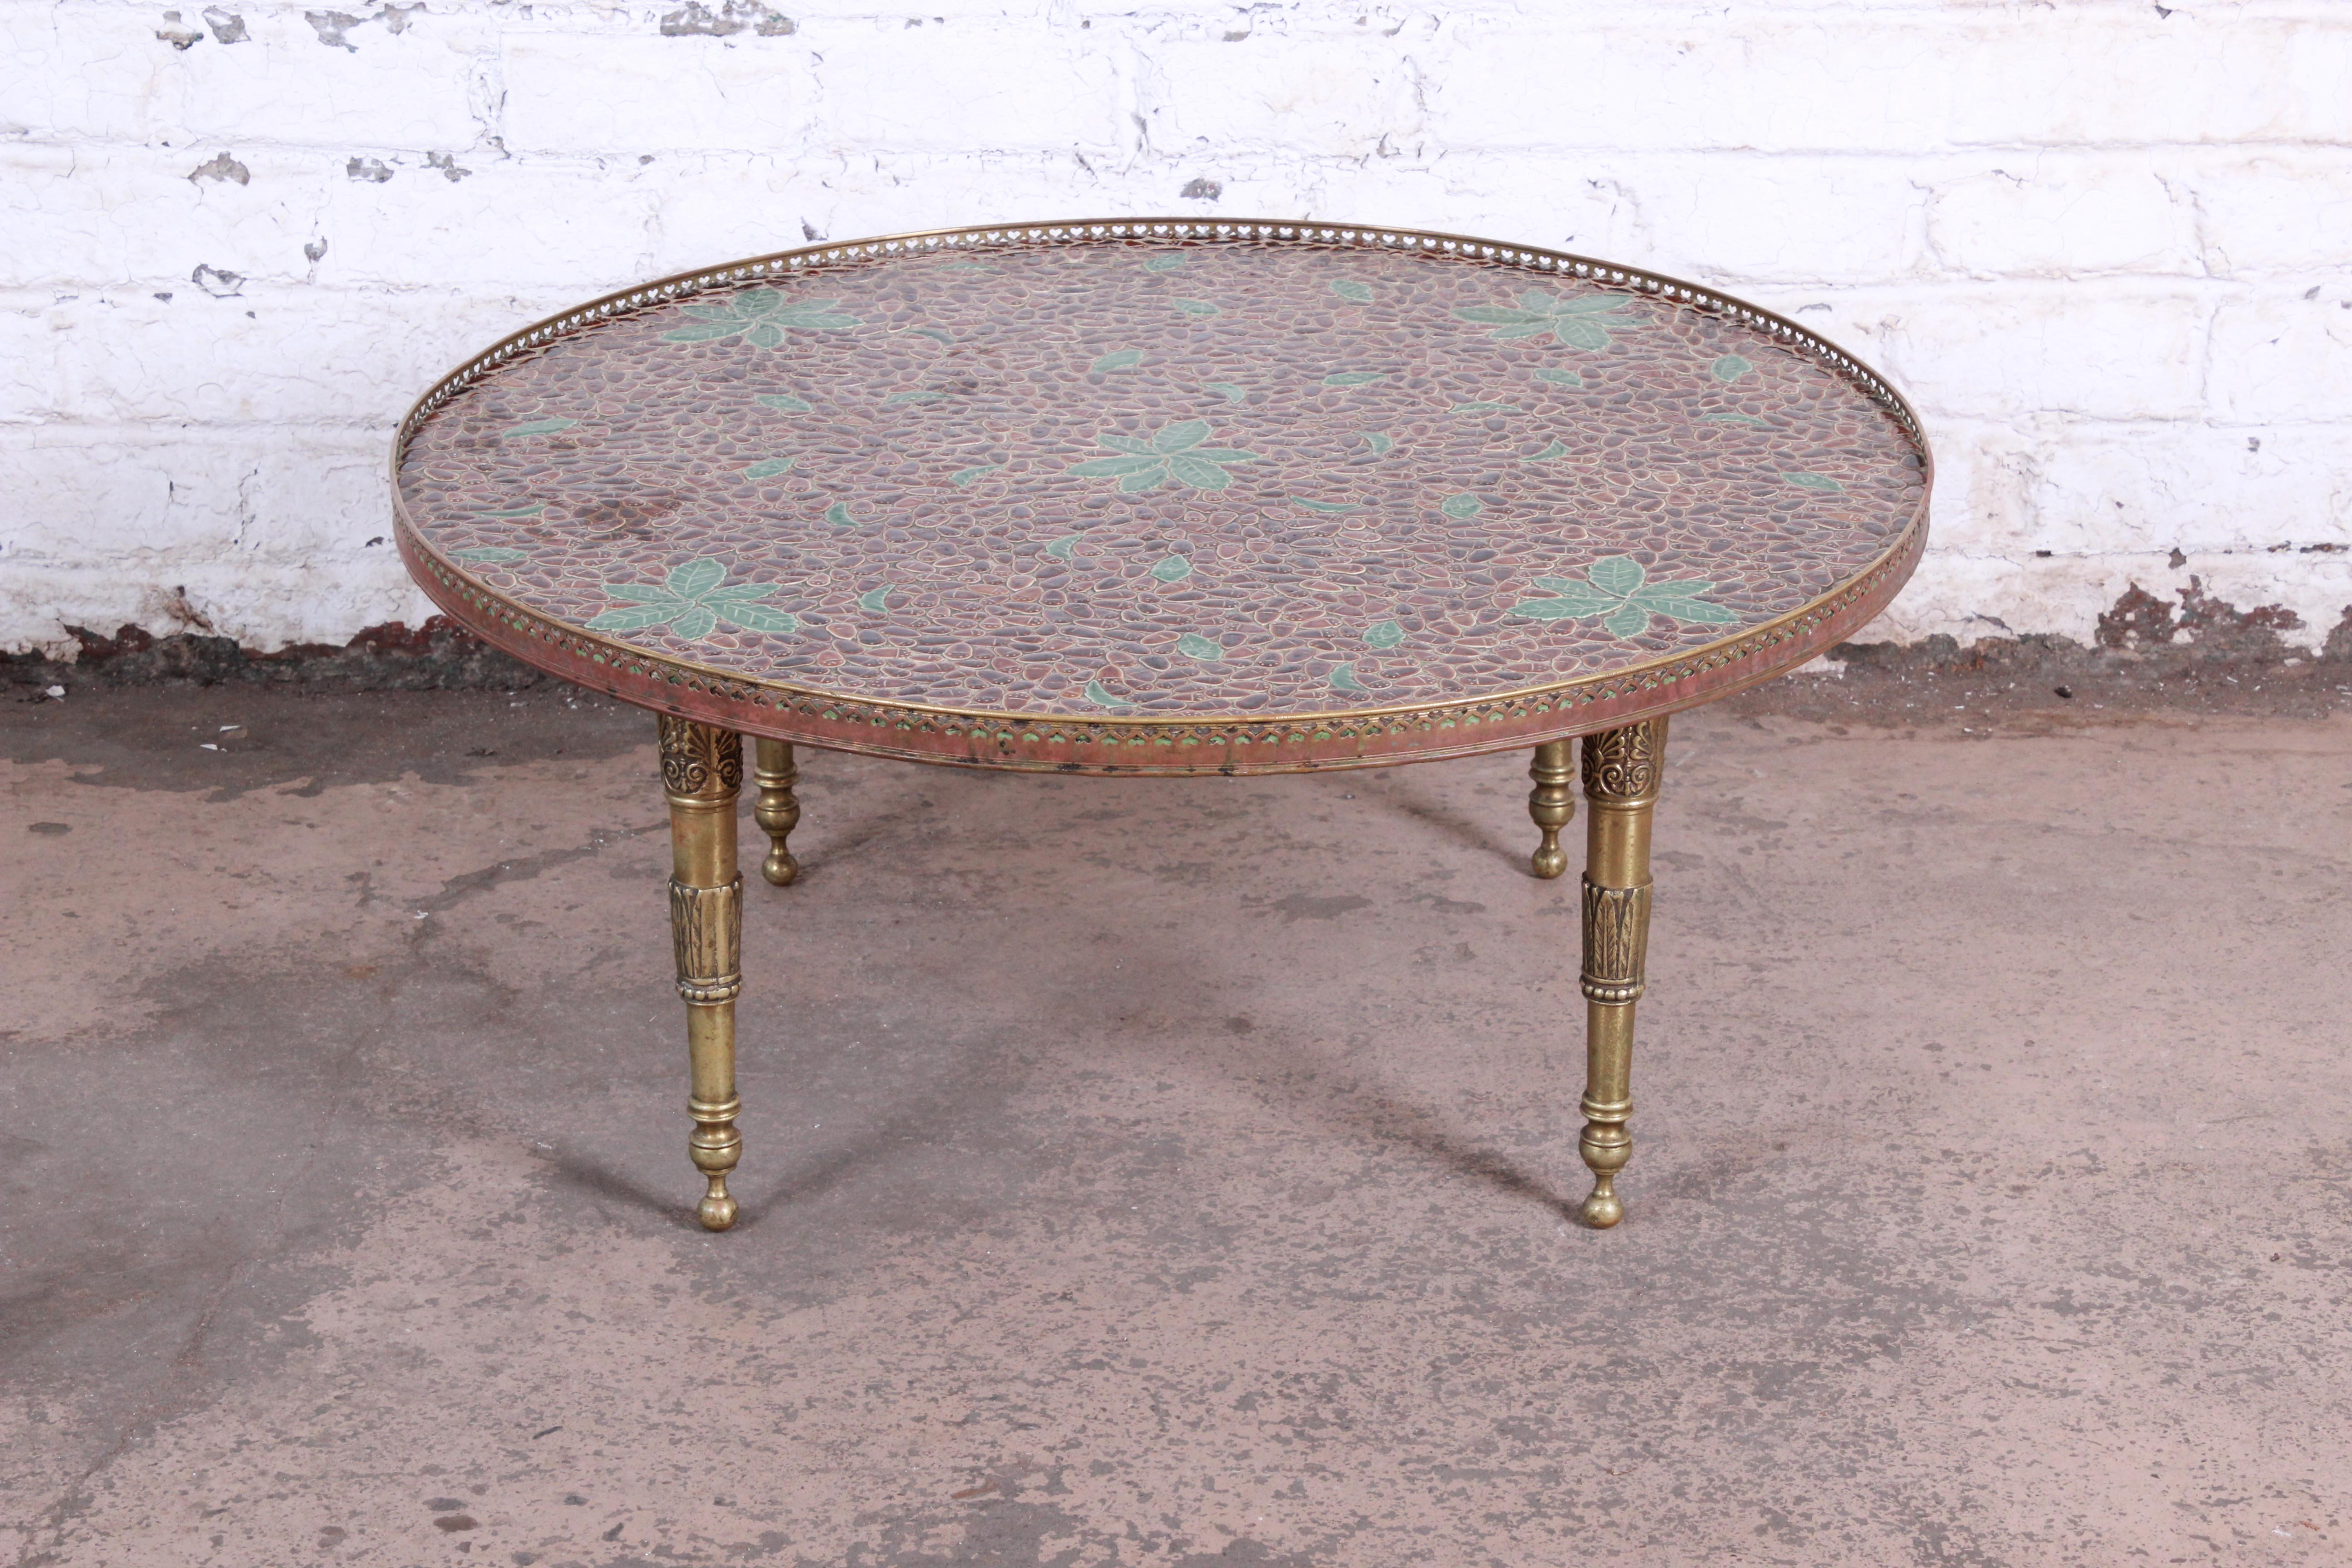 A gorgeous Mid-Century Modern Italian coffee or cocktail table. The table features a unique mosaic tile top in acorn and leaf motif, with sculpted brass legs and a brass gallery. Truly a one-of-a-kind statement piece. Made in Italy, circa 1950s. The